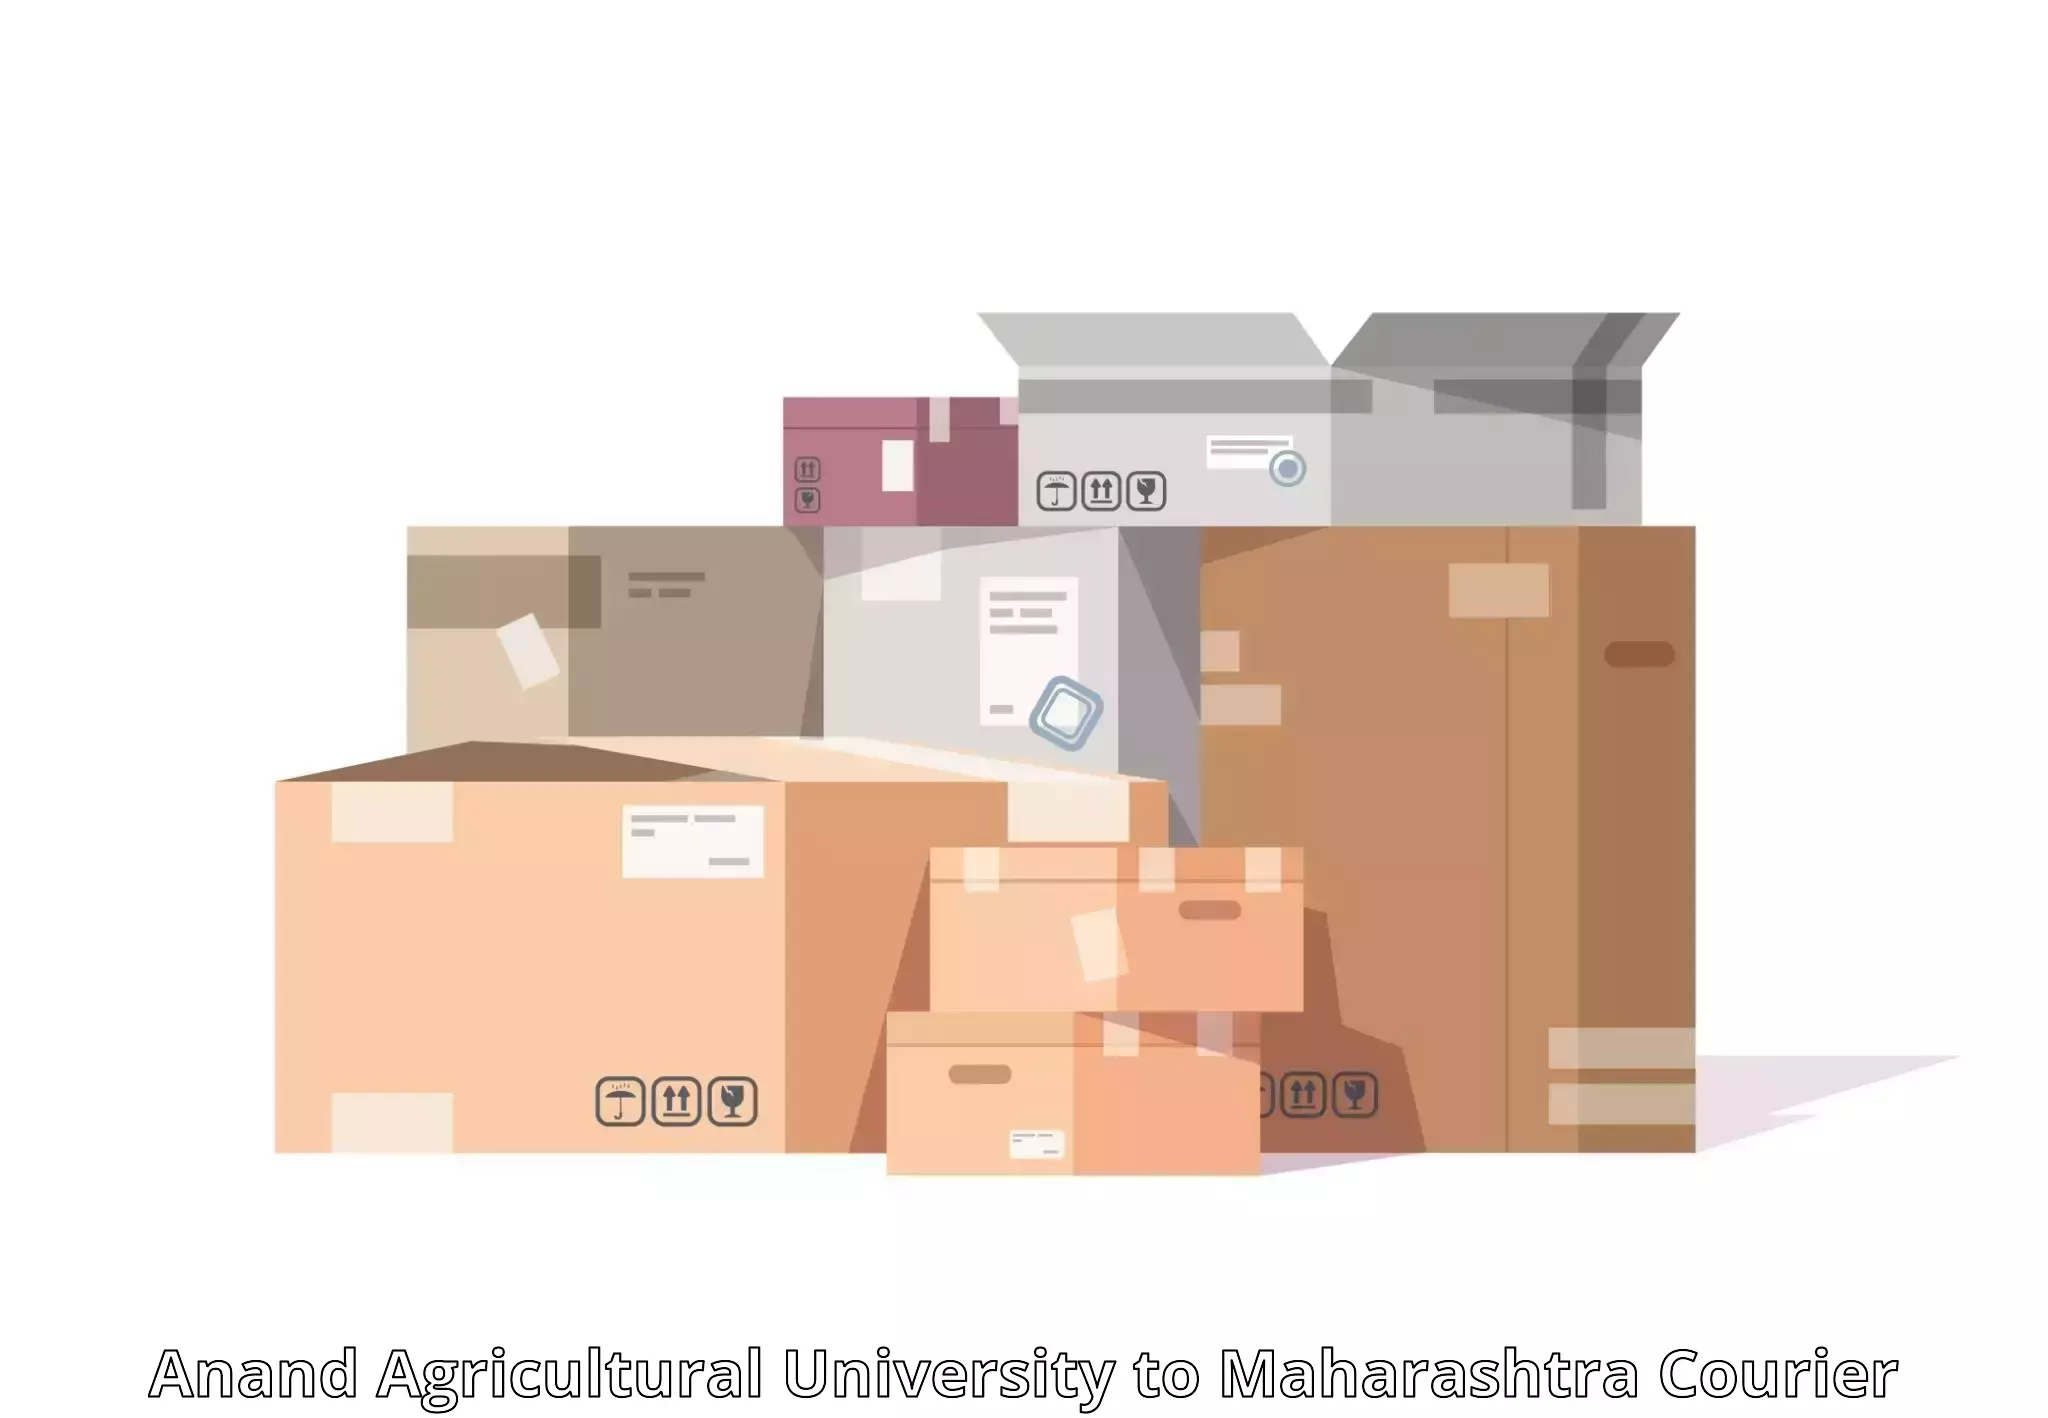 Regular parcel service Anand Agricultural University to Newasa